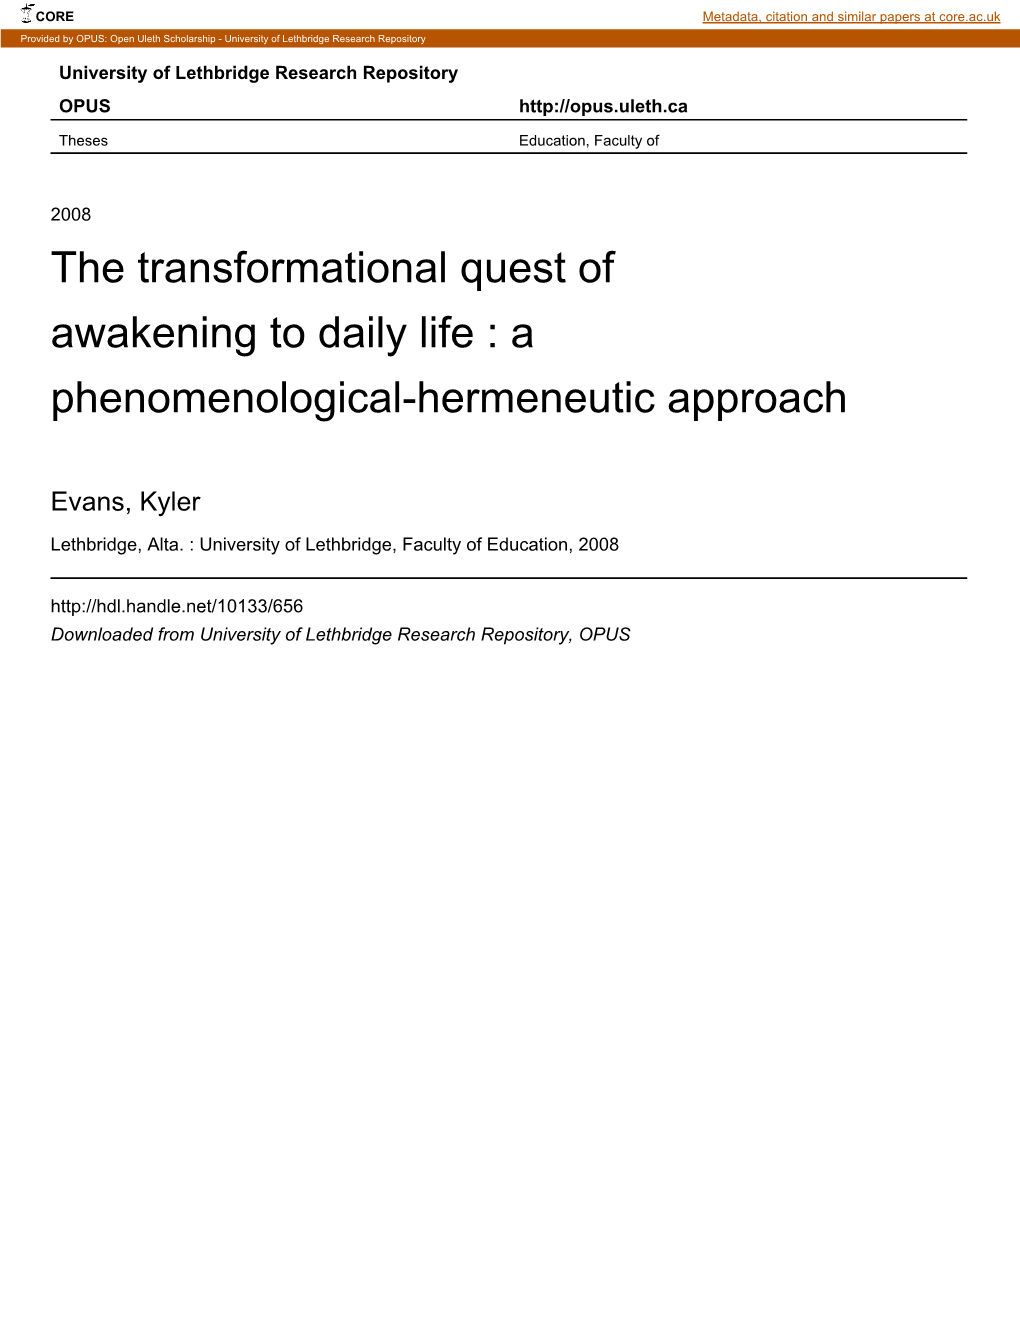 The Transformational Quest of Awakening to Daily Life : a Phenomenological-Hermeneutic Approach